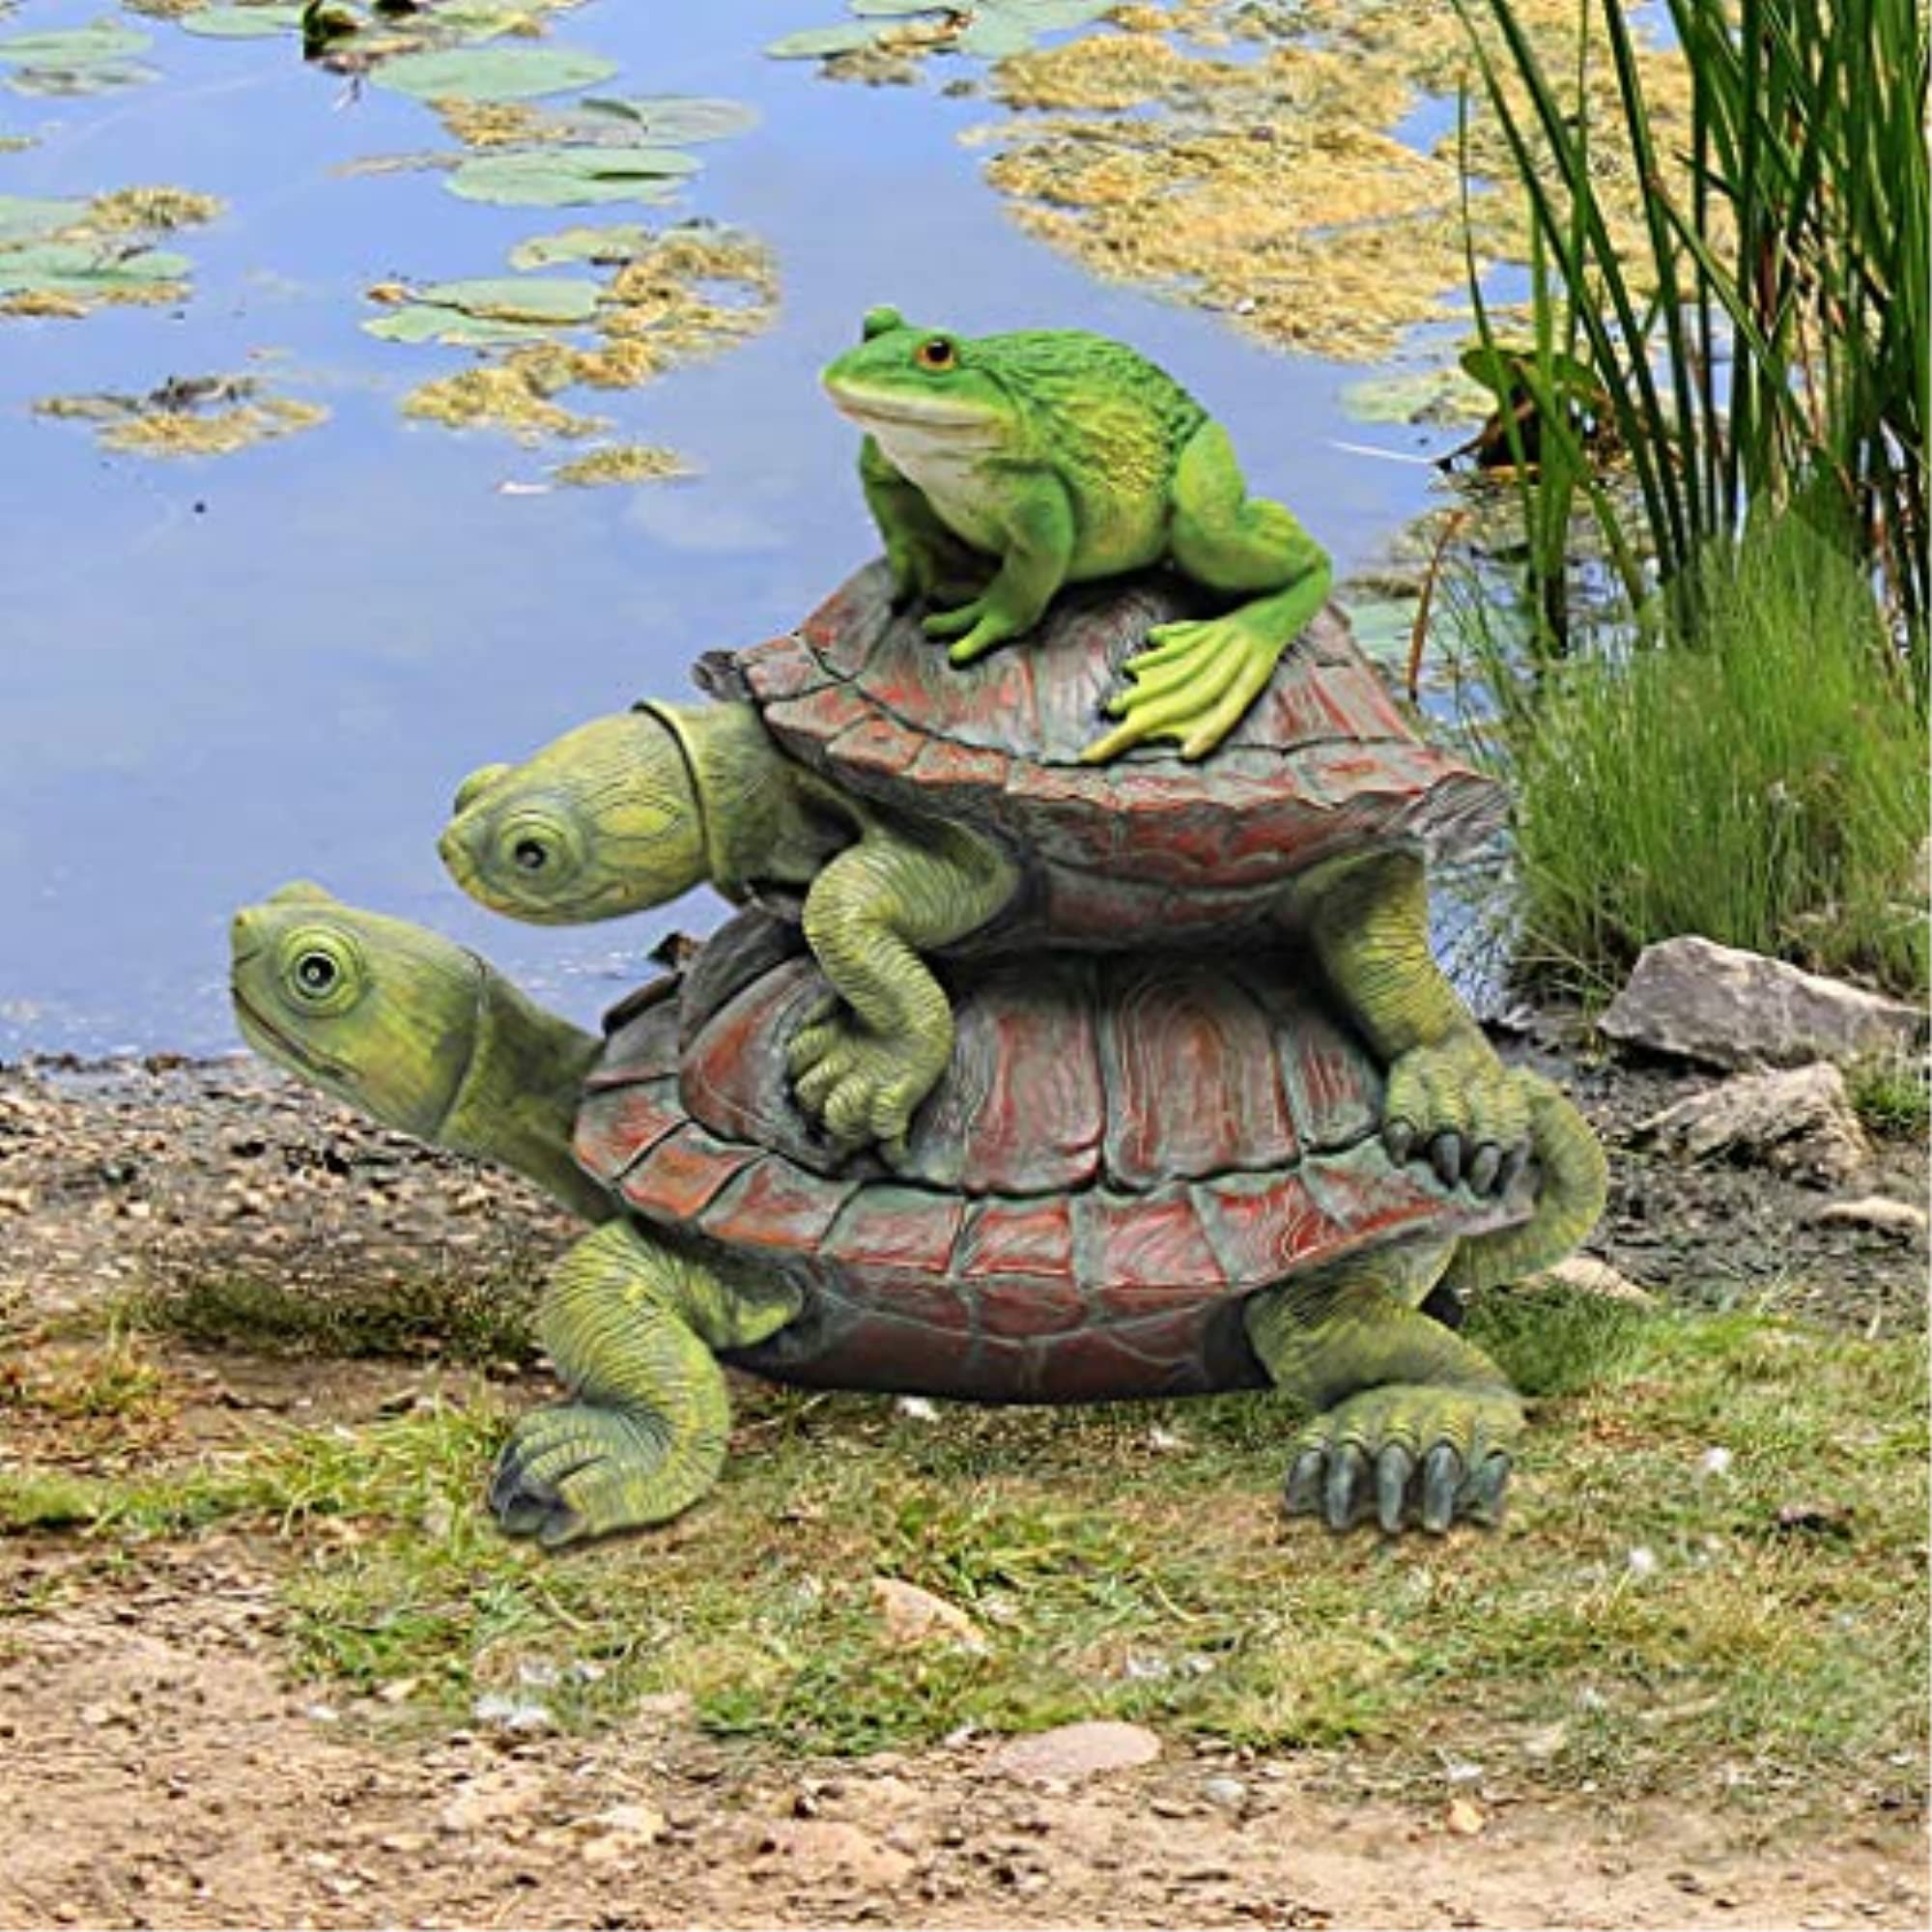 Design Toscano QM221531 in Good Company Frog and Turtles Garden Animal Statue, Set of One, Multicolored